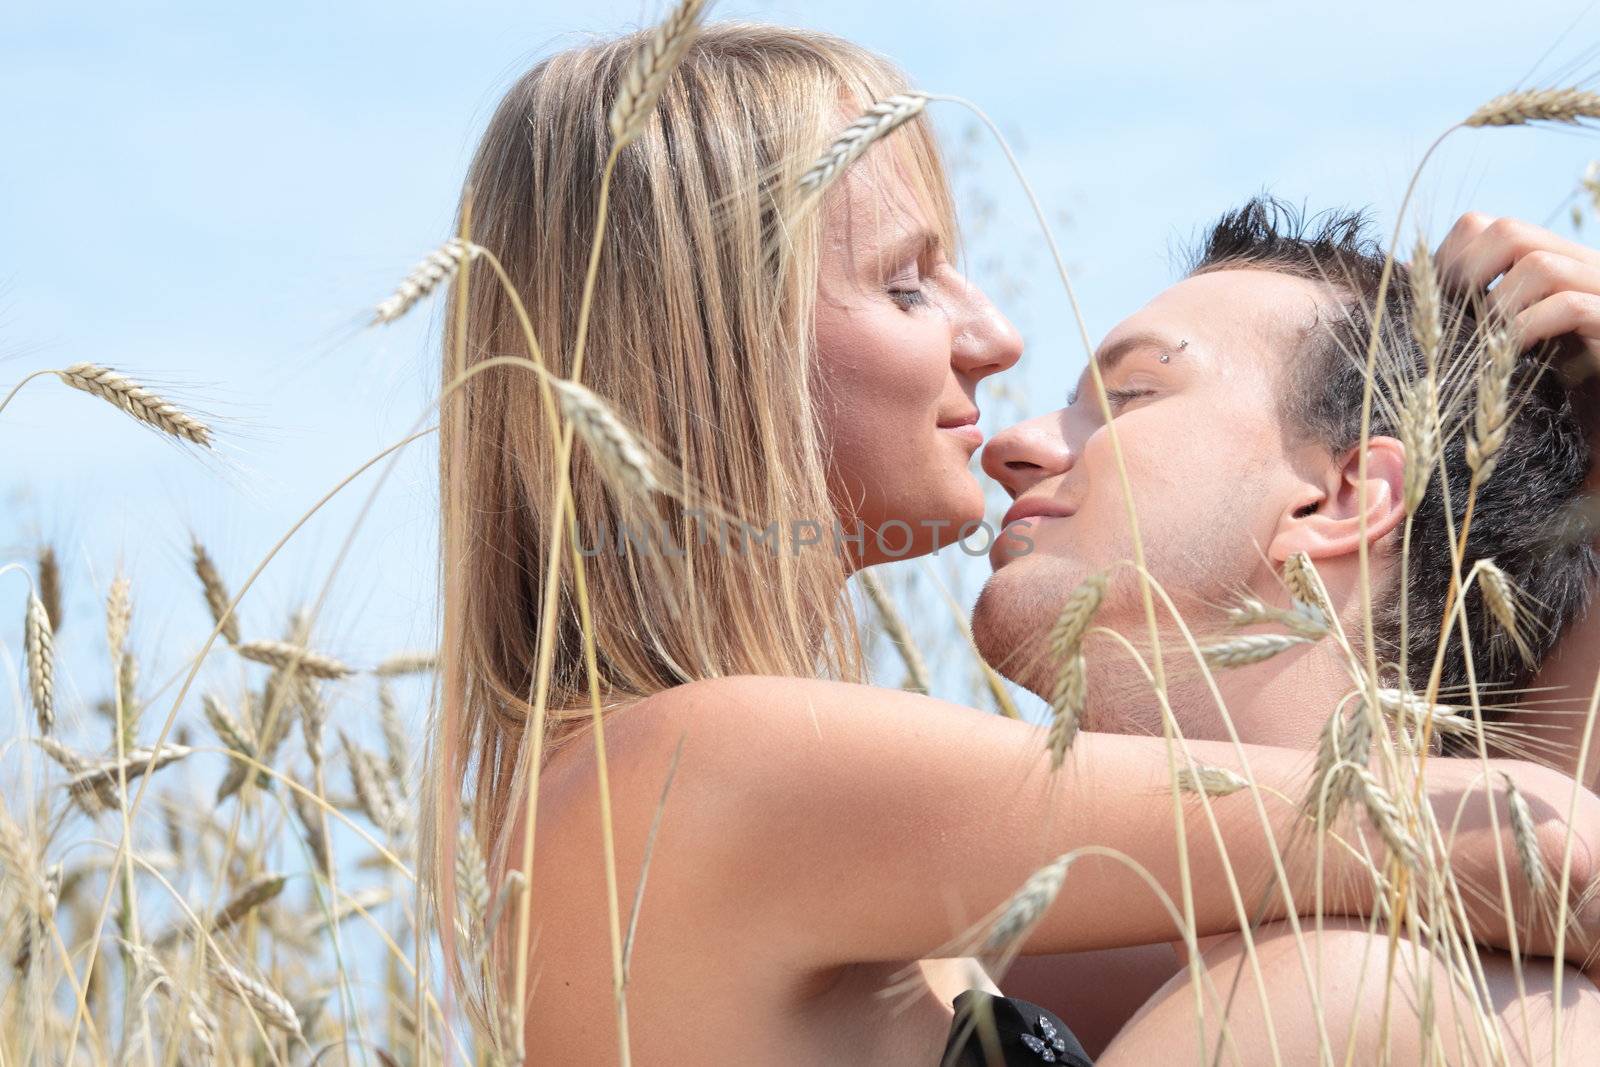 A beautiful couple sitting an kissing in wheat field